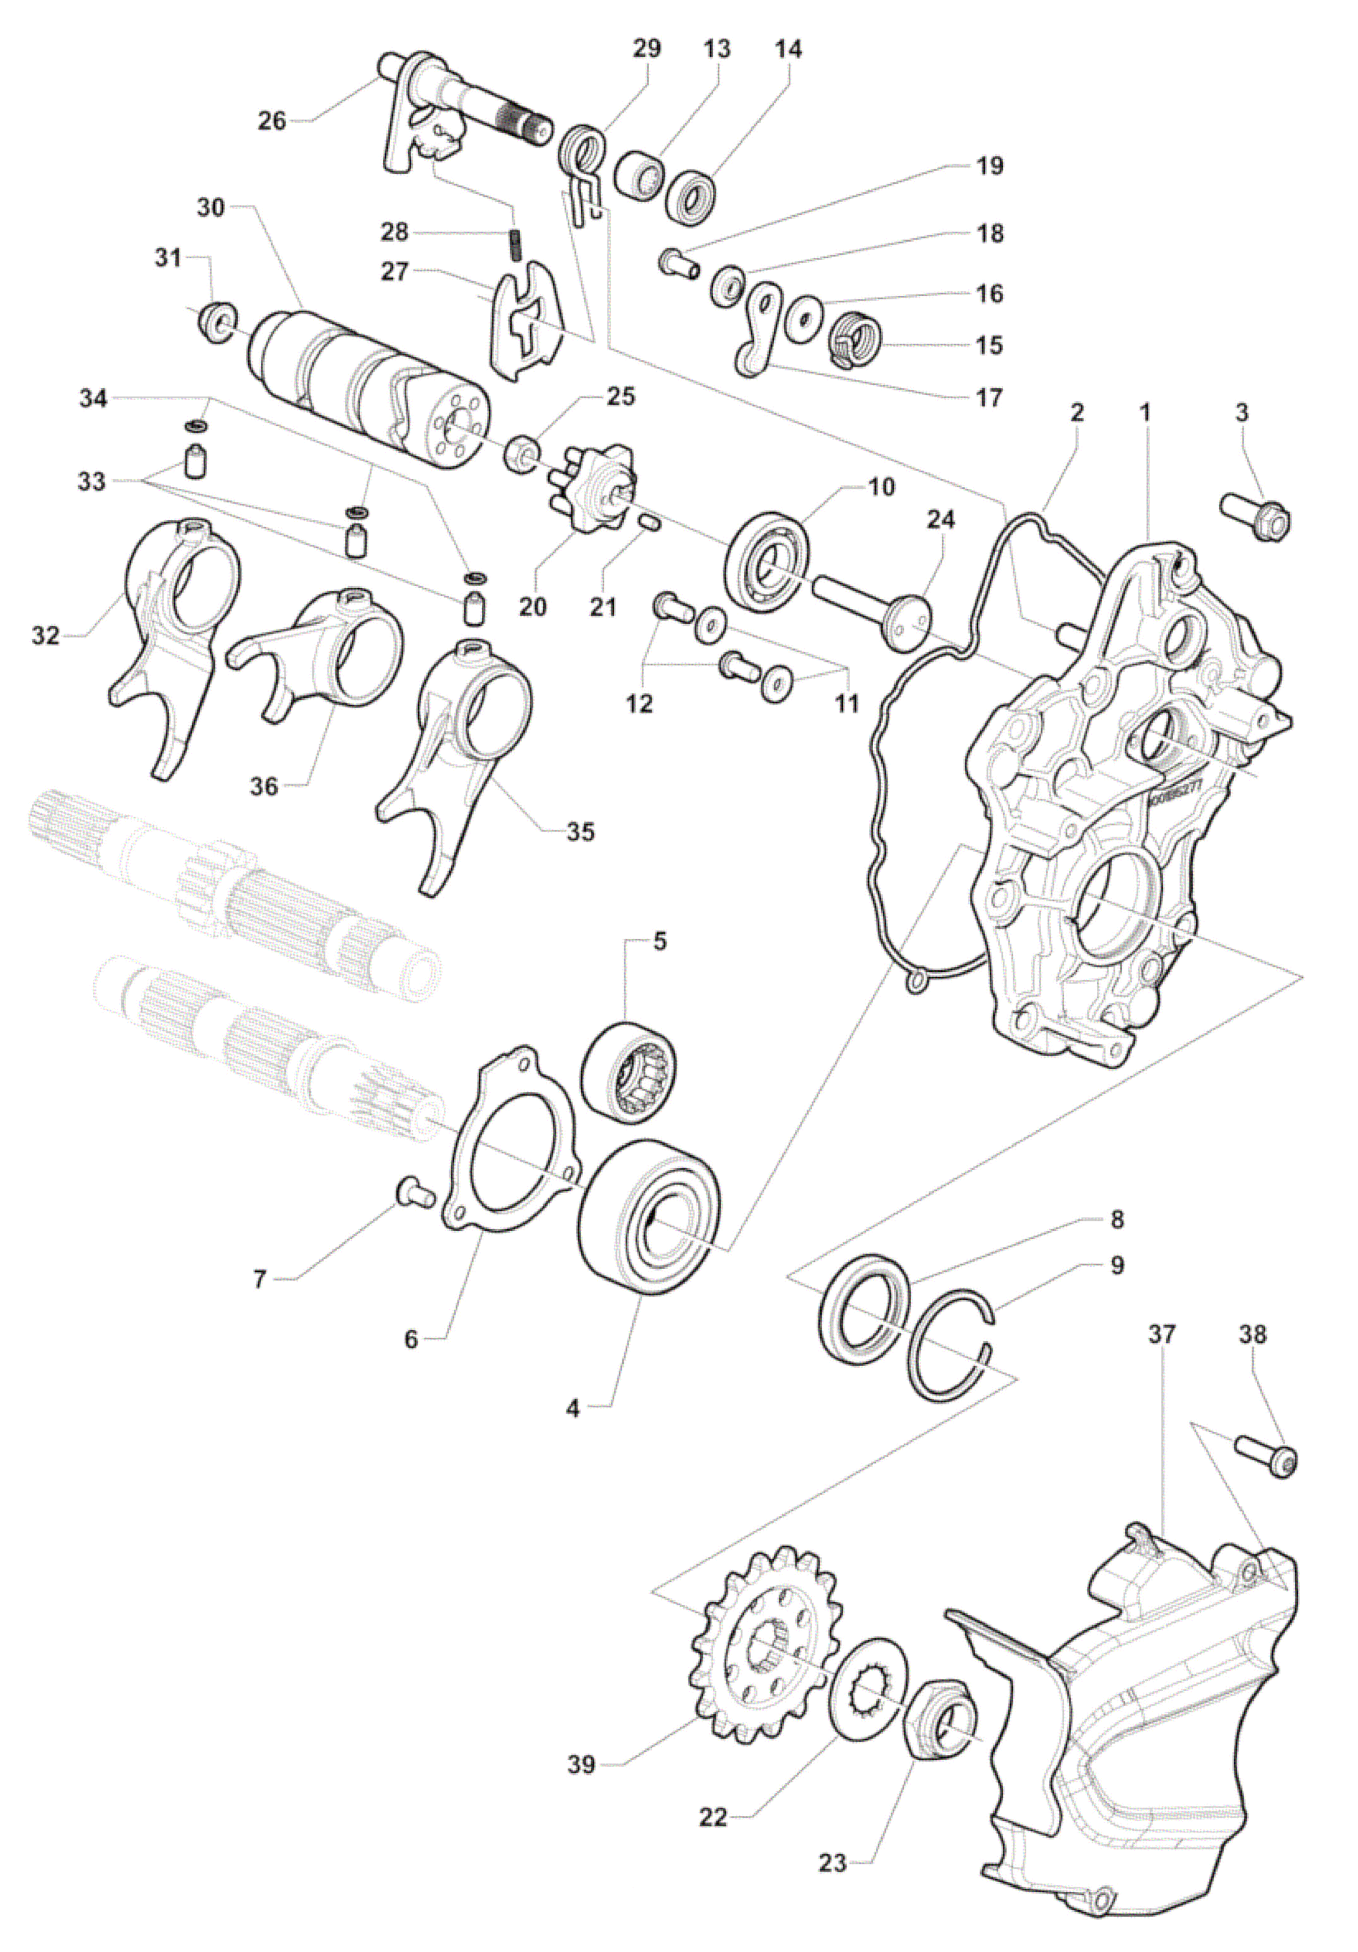 Gear Selector Assembly


